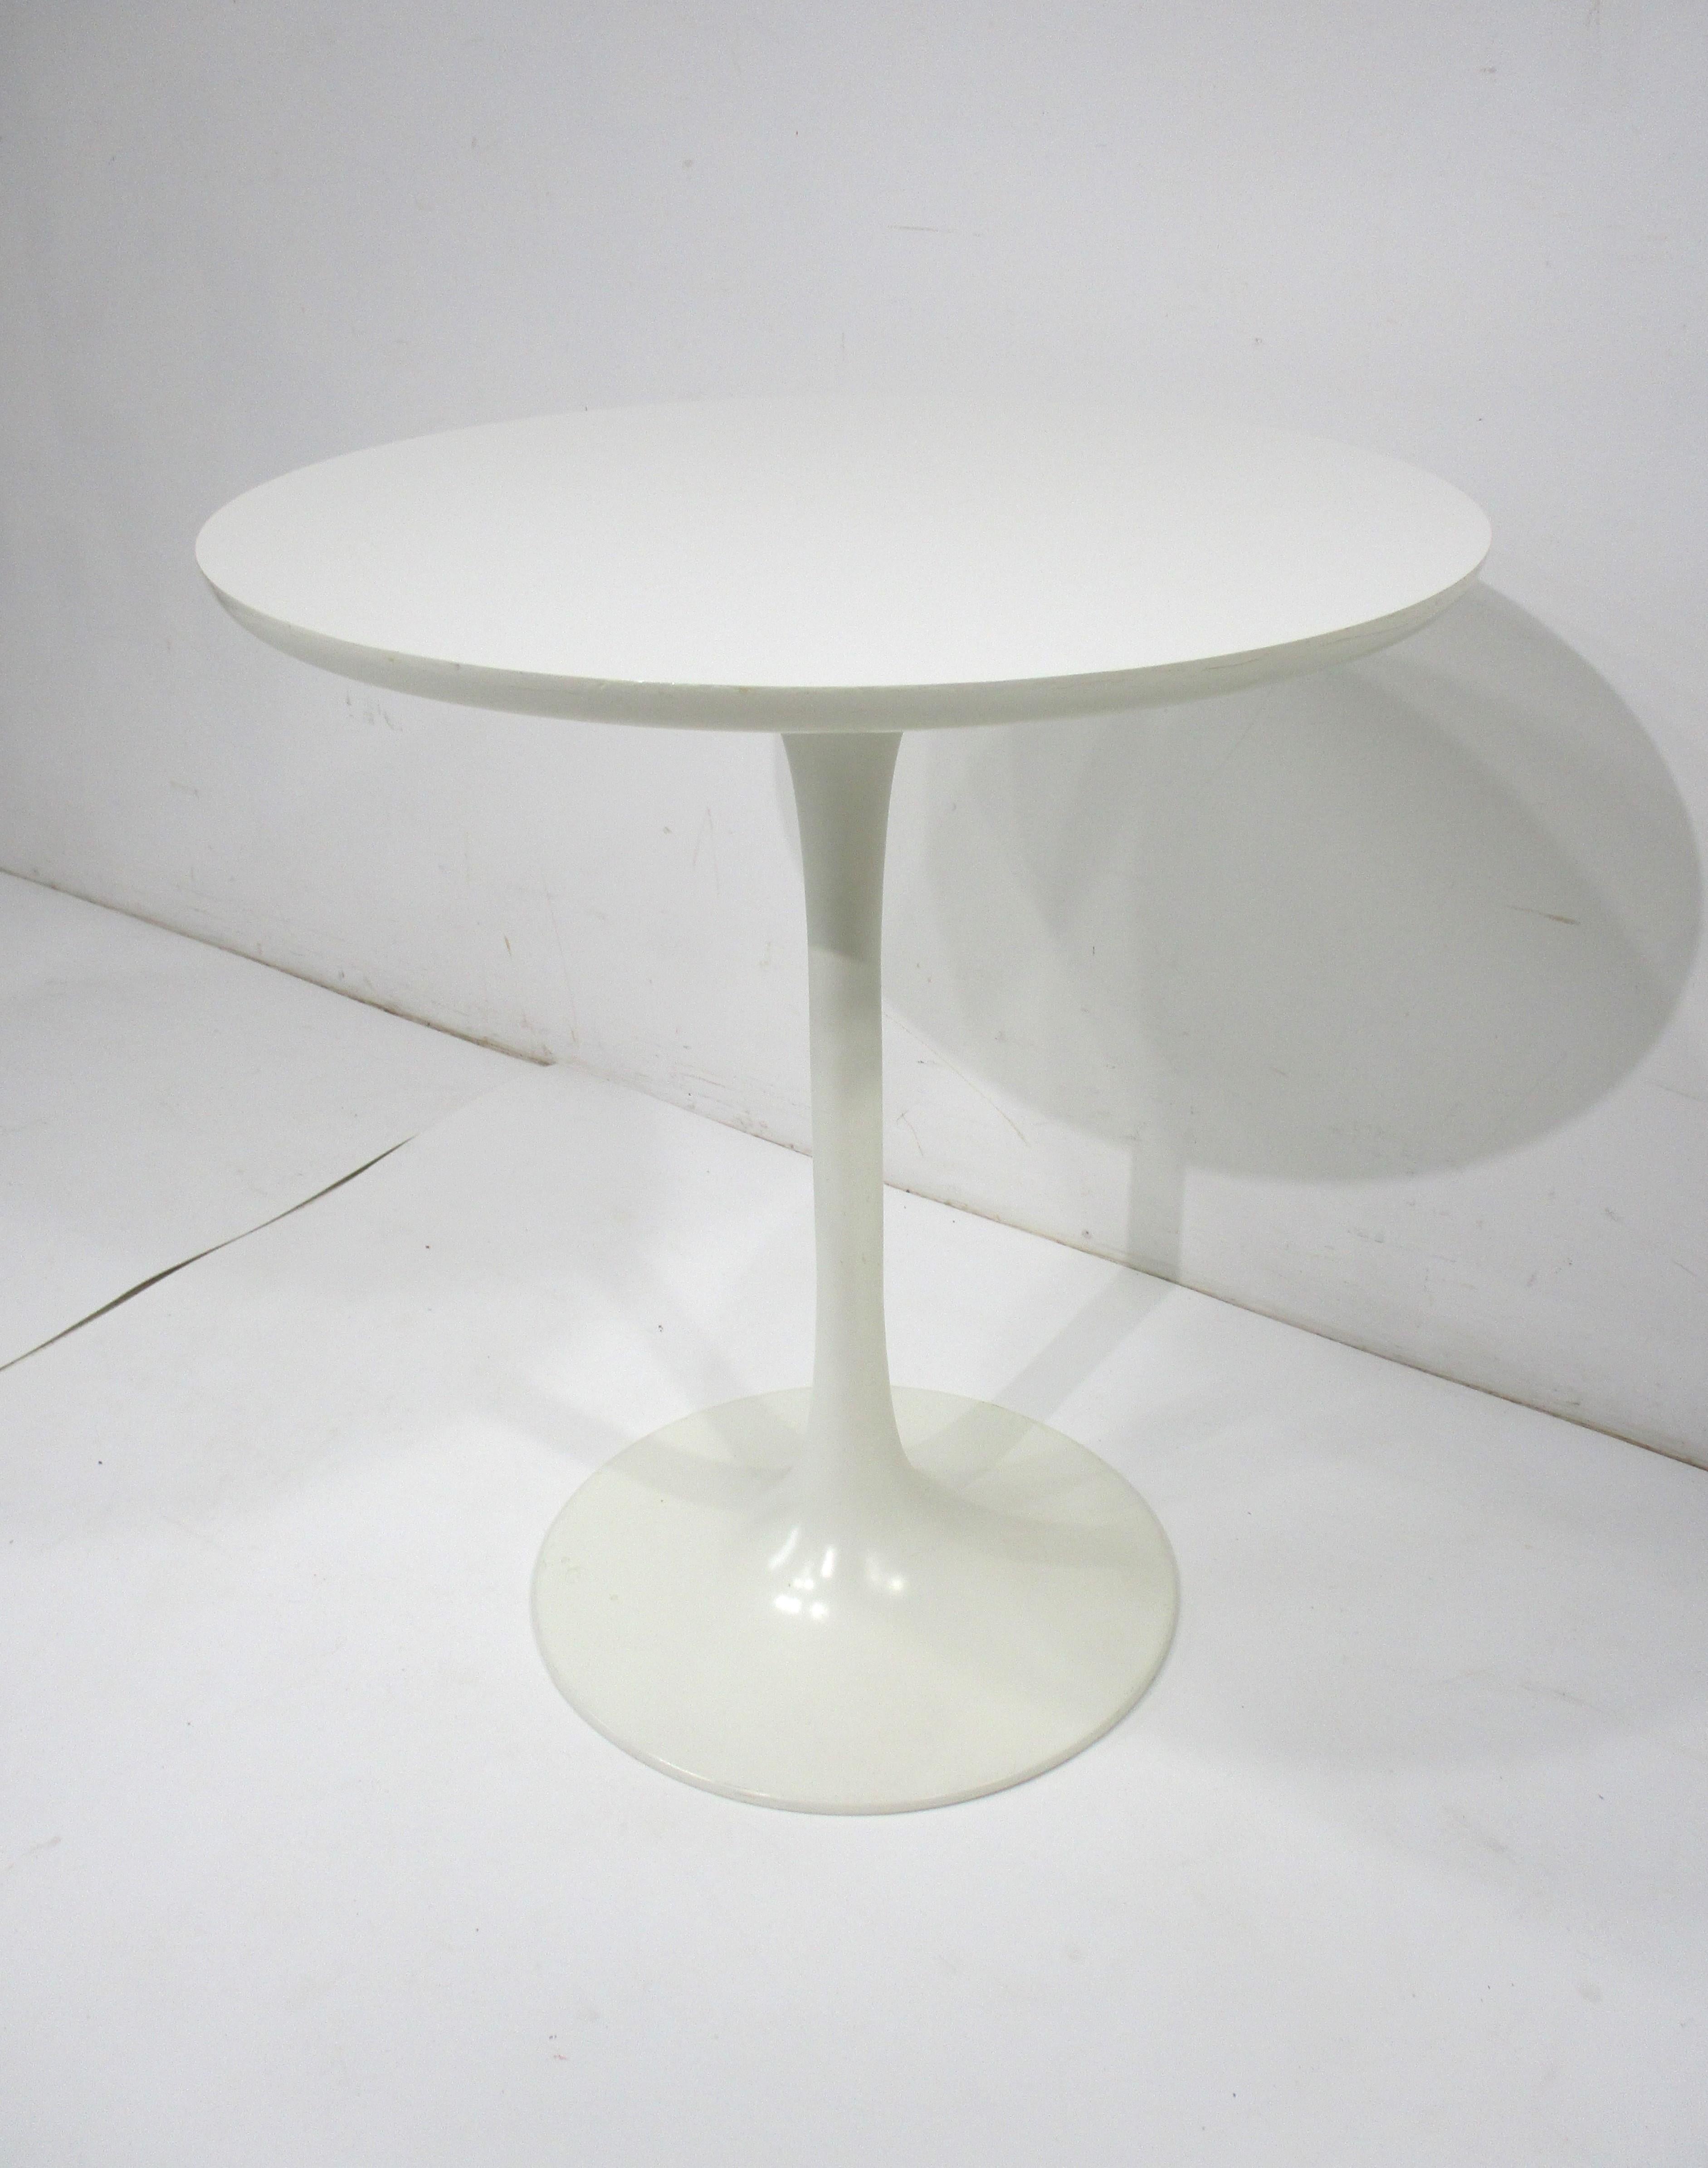 Taller Tulip Side / Lamp Table by Maurice Burke in the style of Saarinen  1